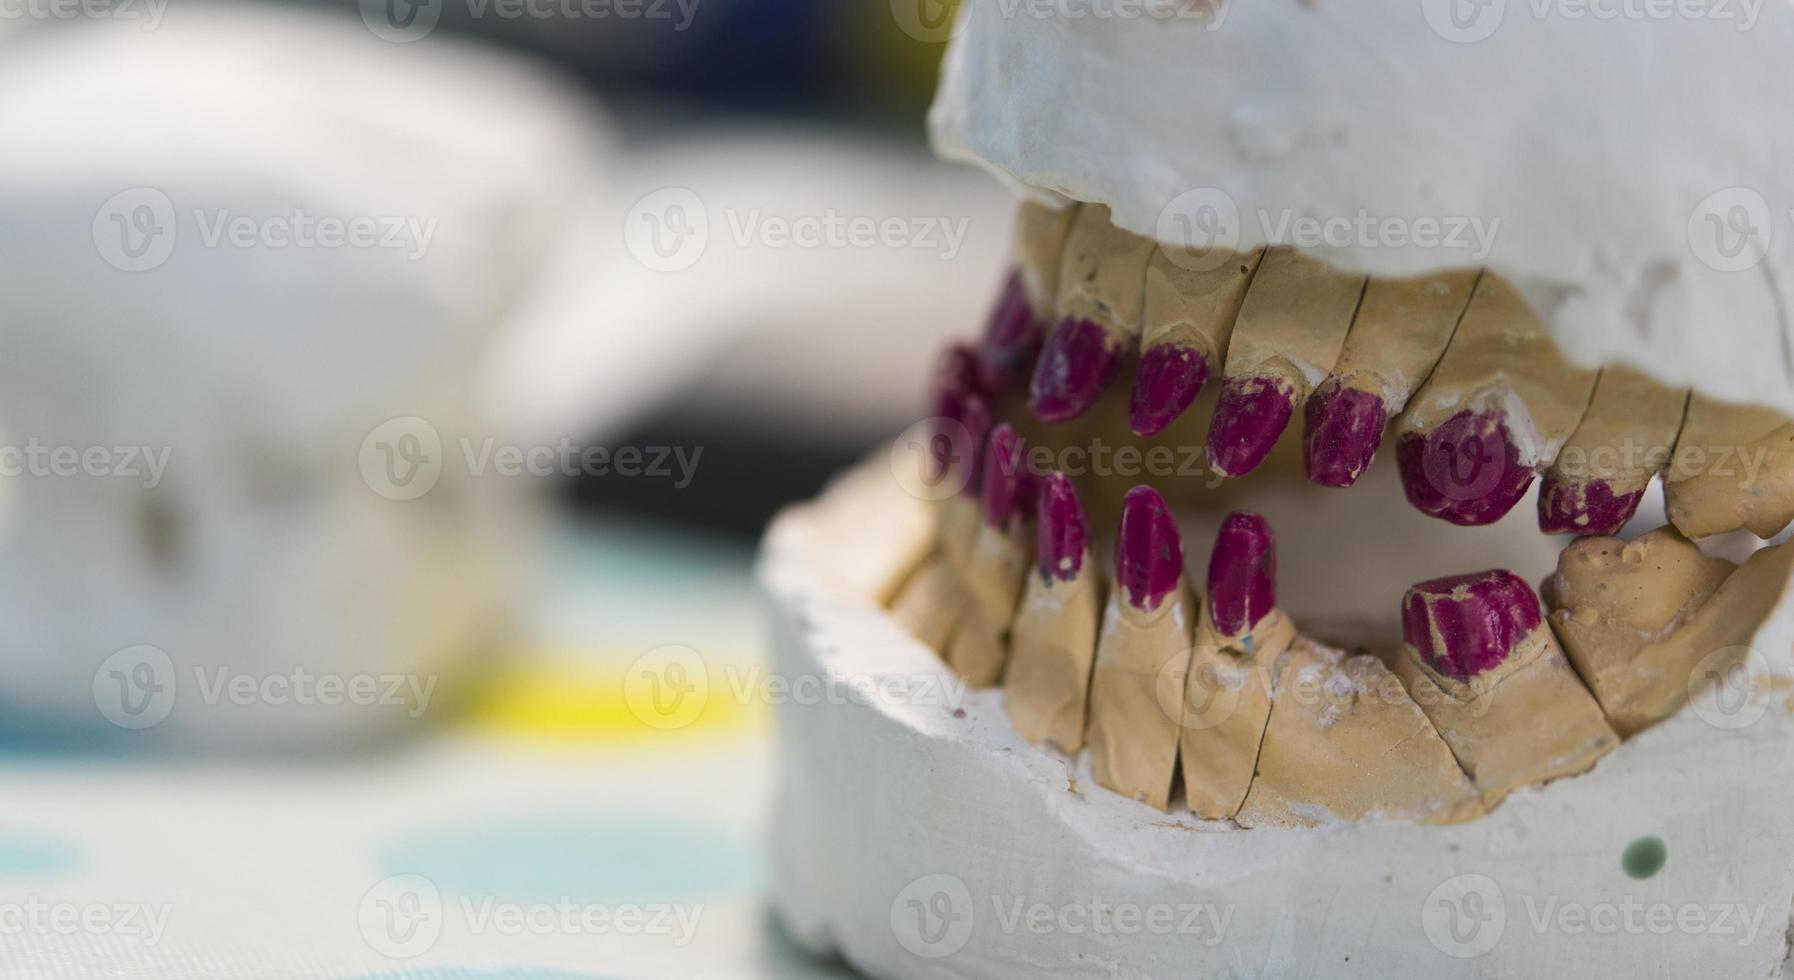 Dental prosthesis, dentures, prosthetics work. Prosthetics hands while working on the denture, false teeth, a study and a table with dental tools photo